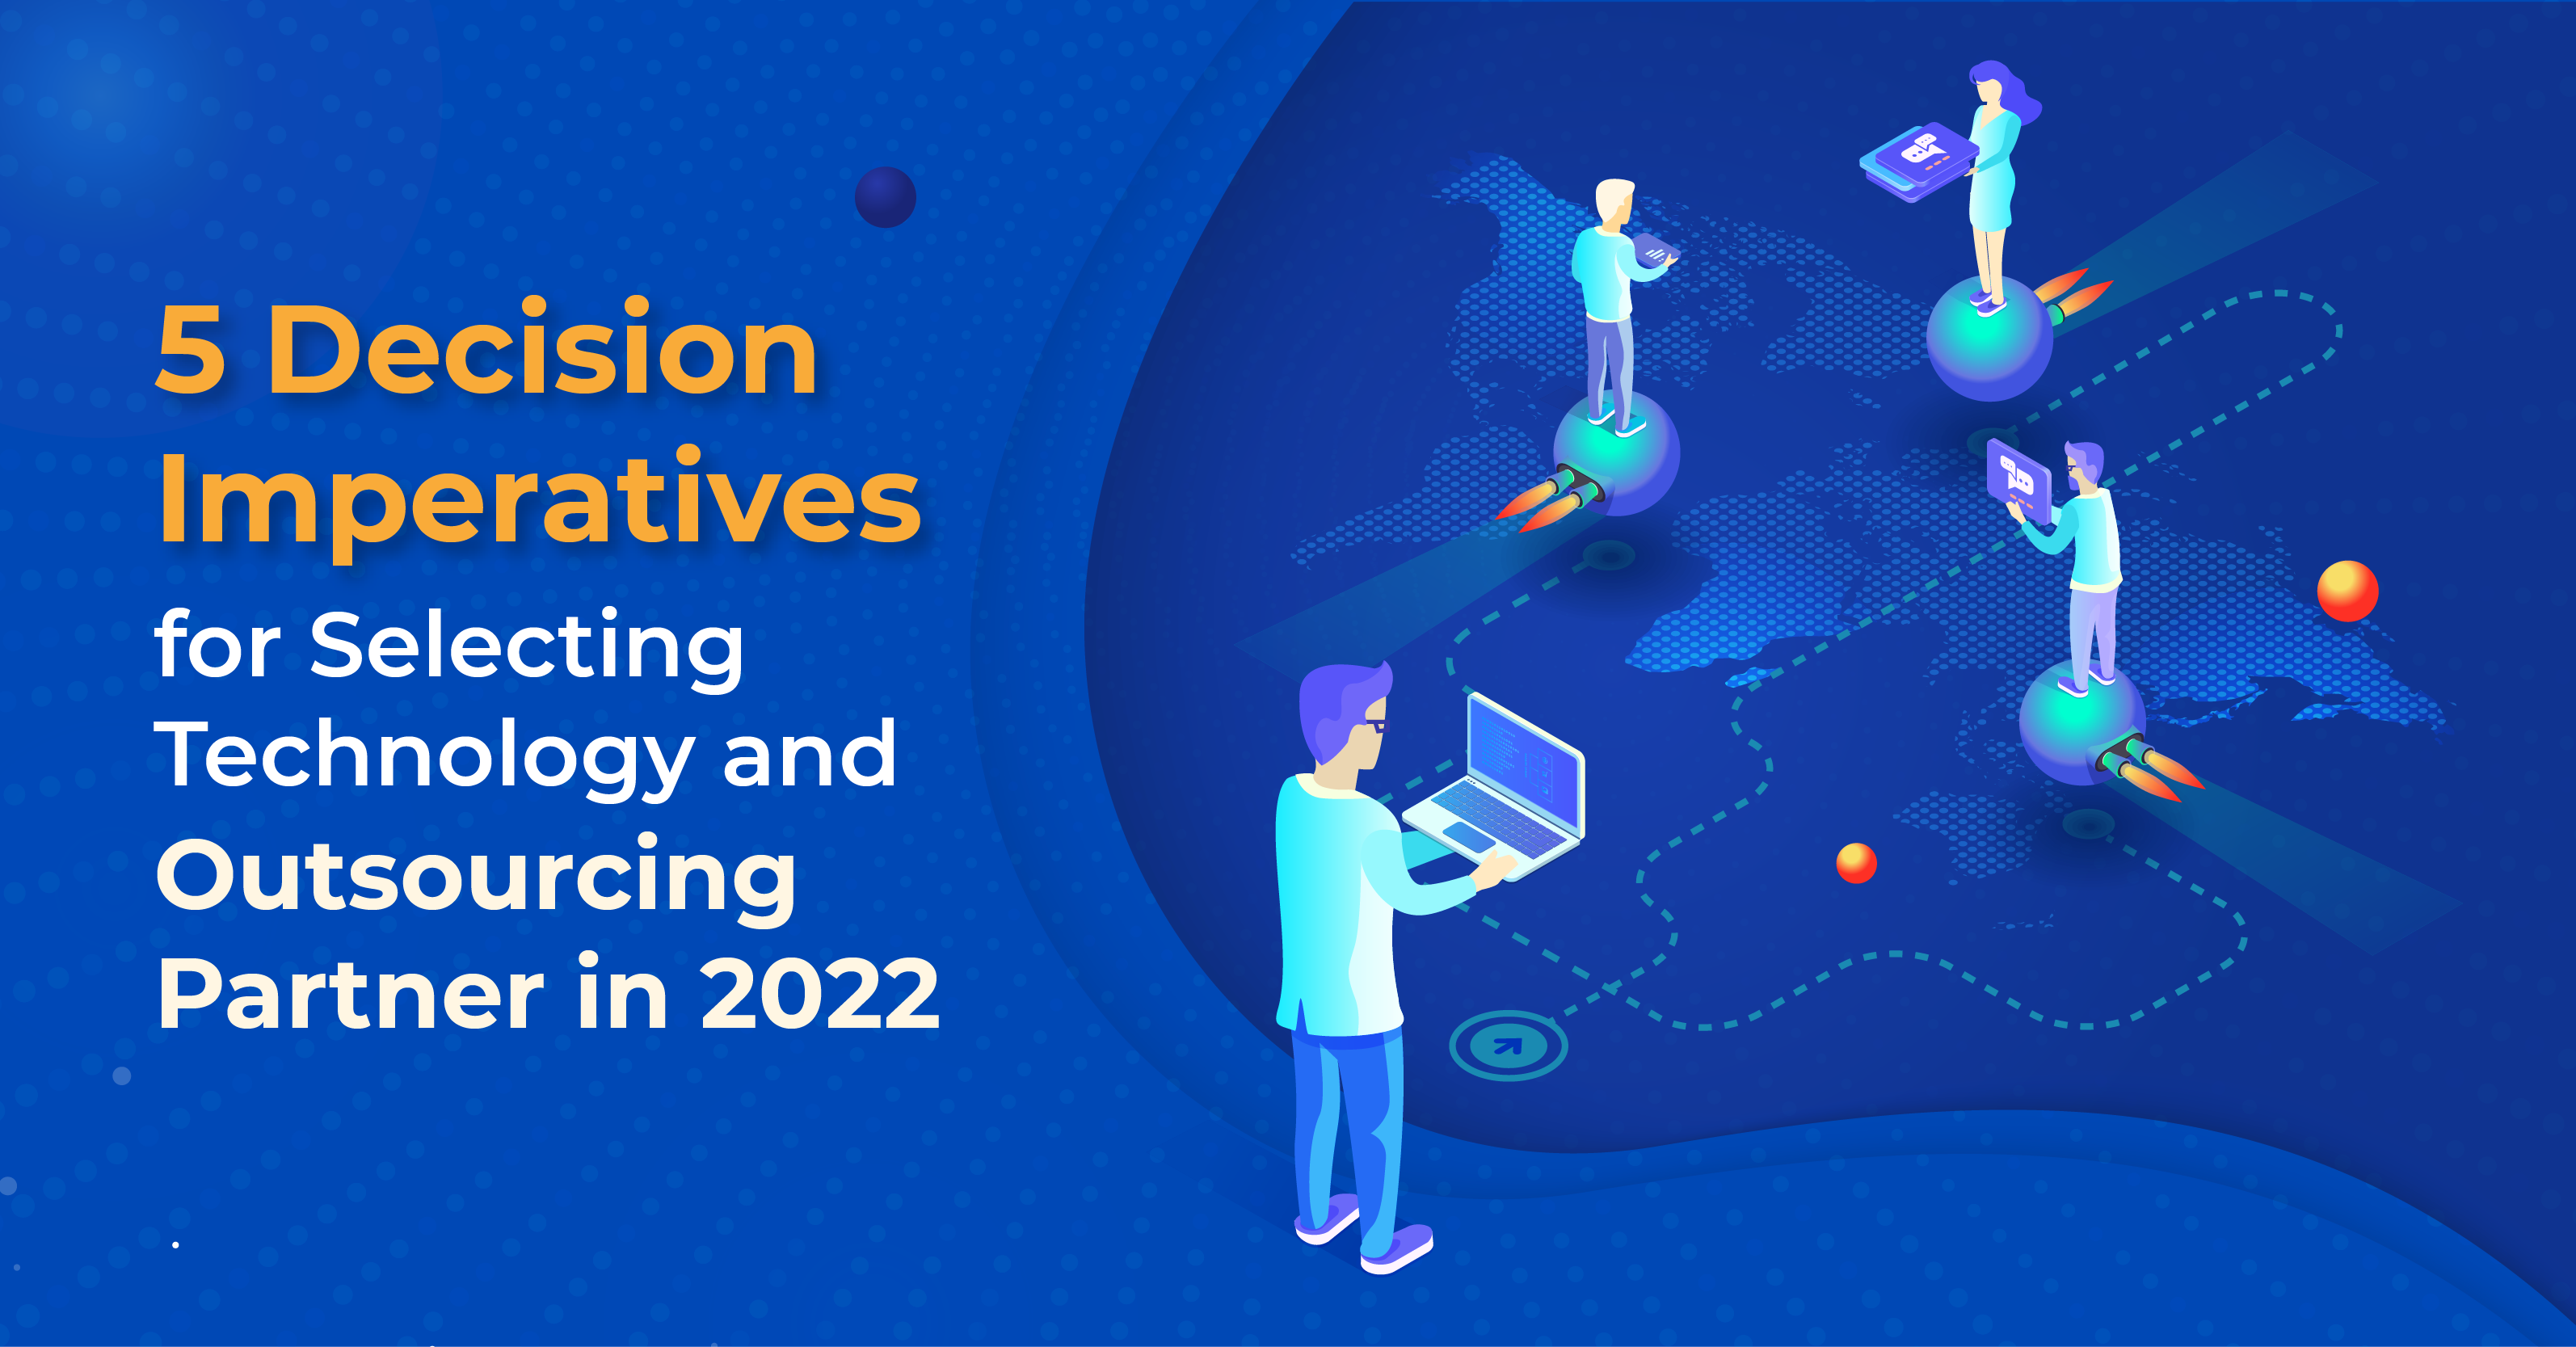 5 Decision Imperatives for Selecting Technology and Outsourcing Partner in 2022